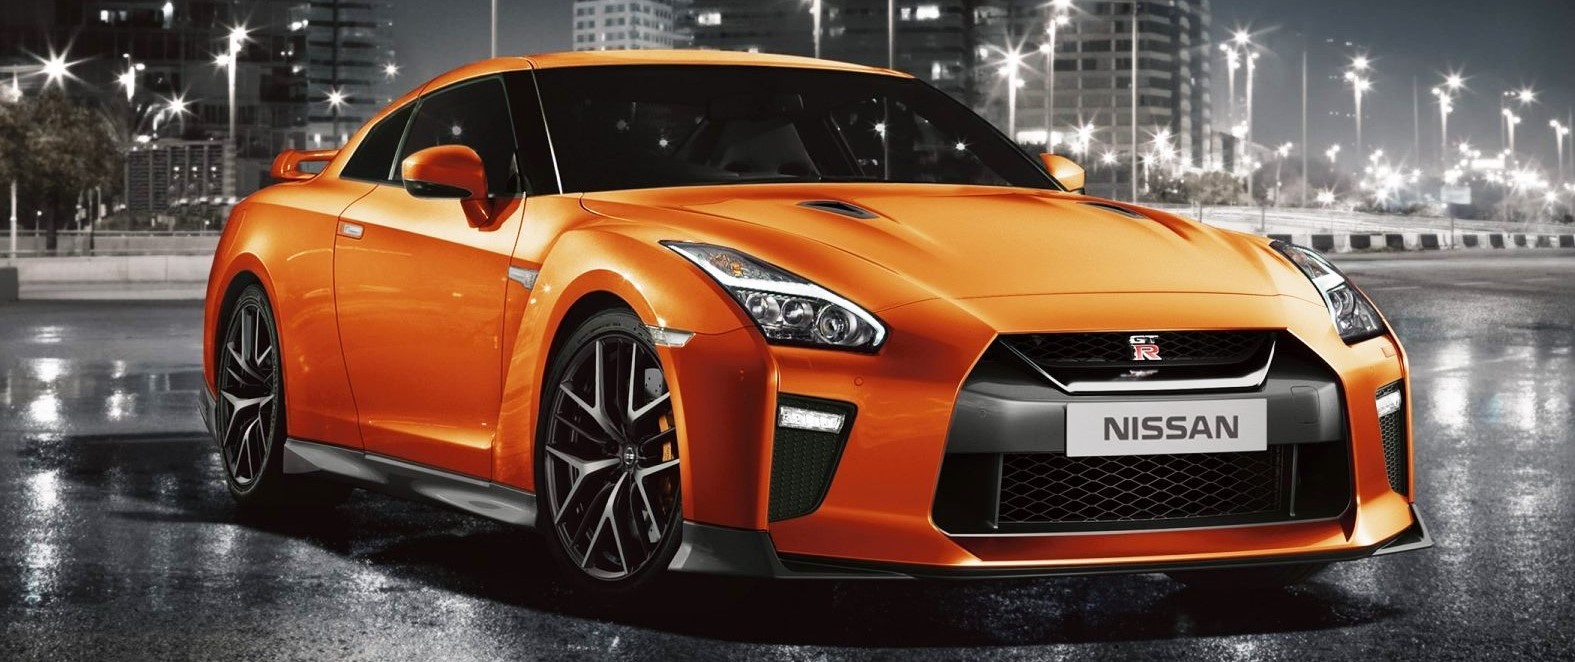 Nissan GT-R Launched in India @ INR 1.99 Crore